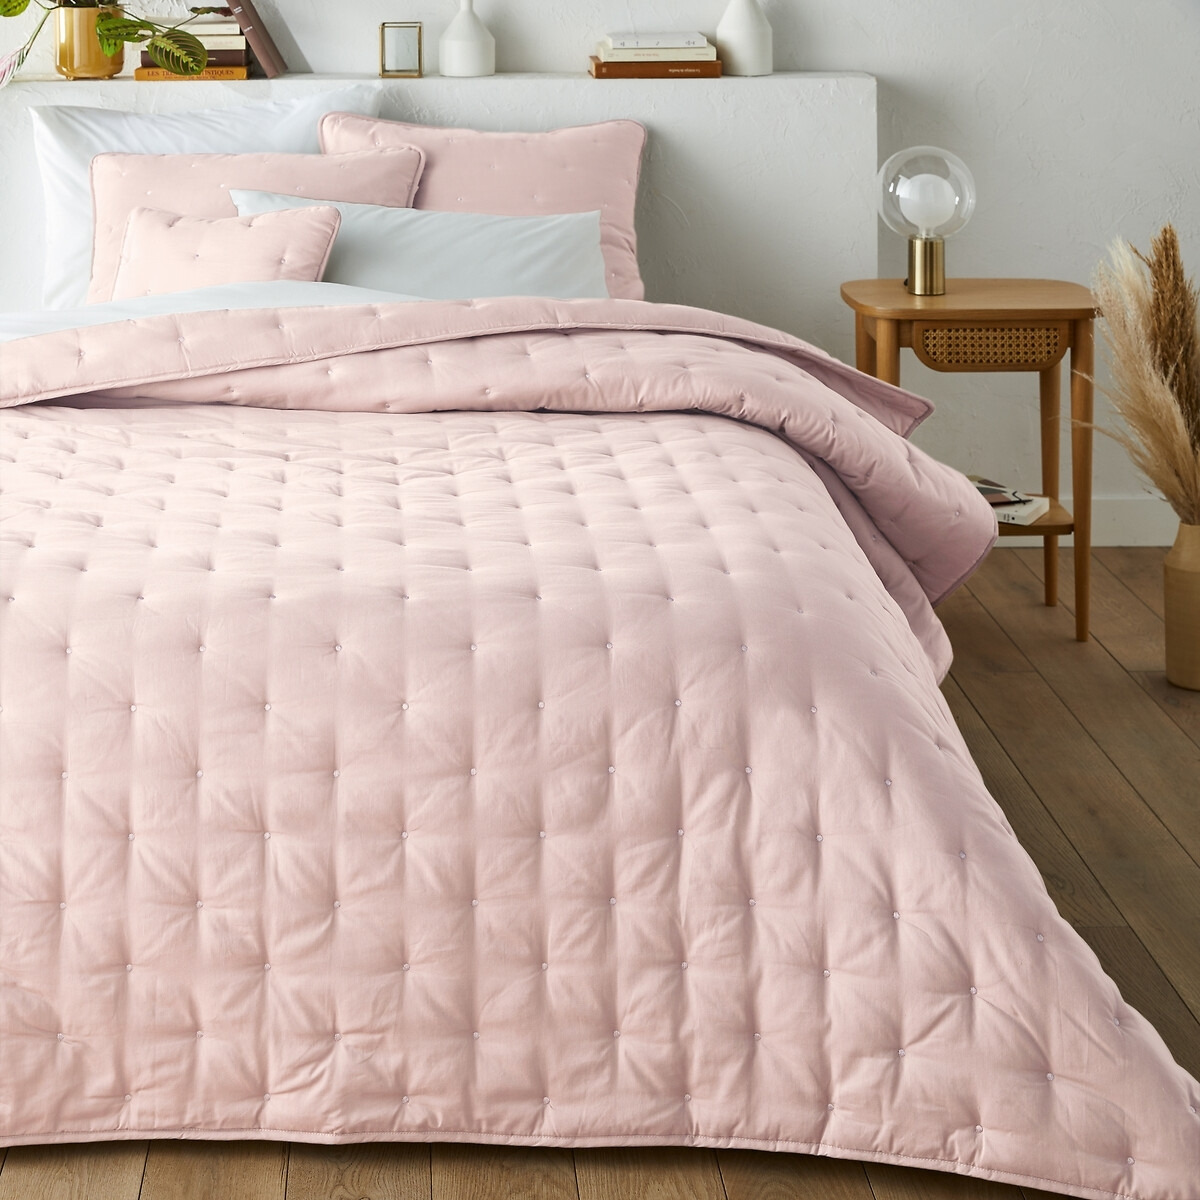 Aéri Embroidered Quilted 100% Cotton Bedspread - image 1